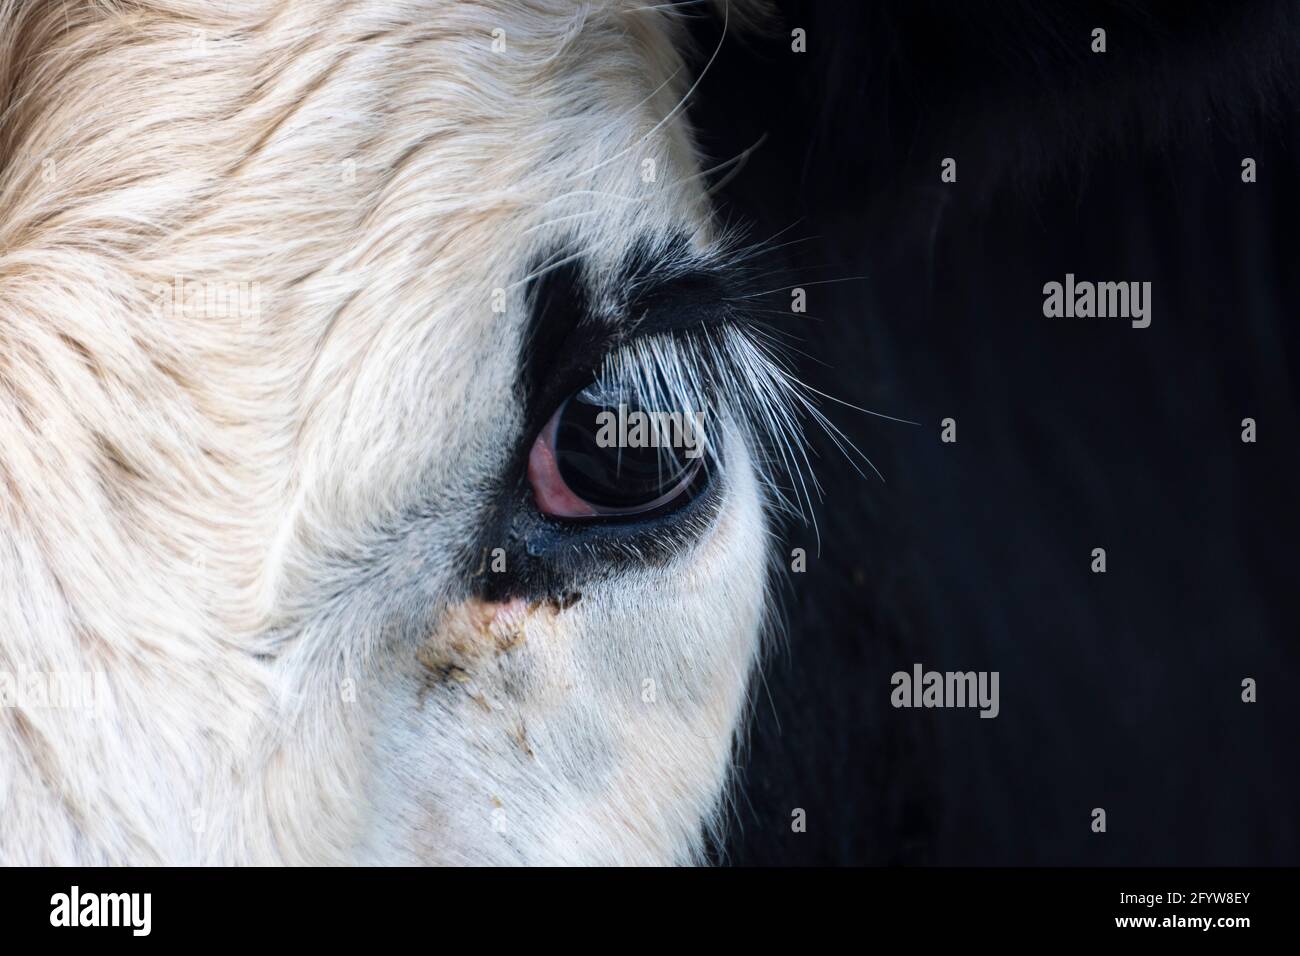 Close up of a cows eye, Pukekoe, Auckland, North Island, New Zealand Stock Photo